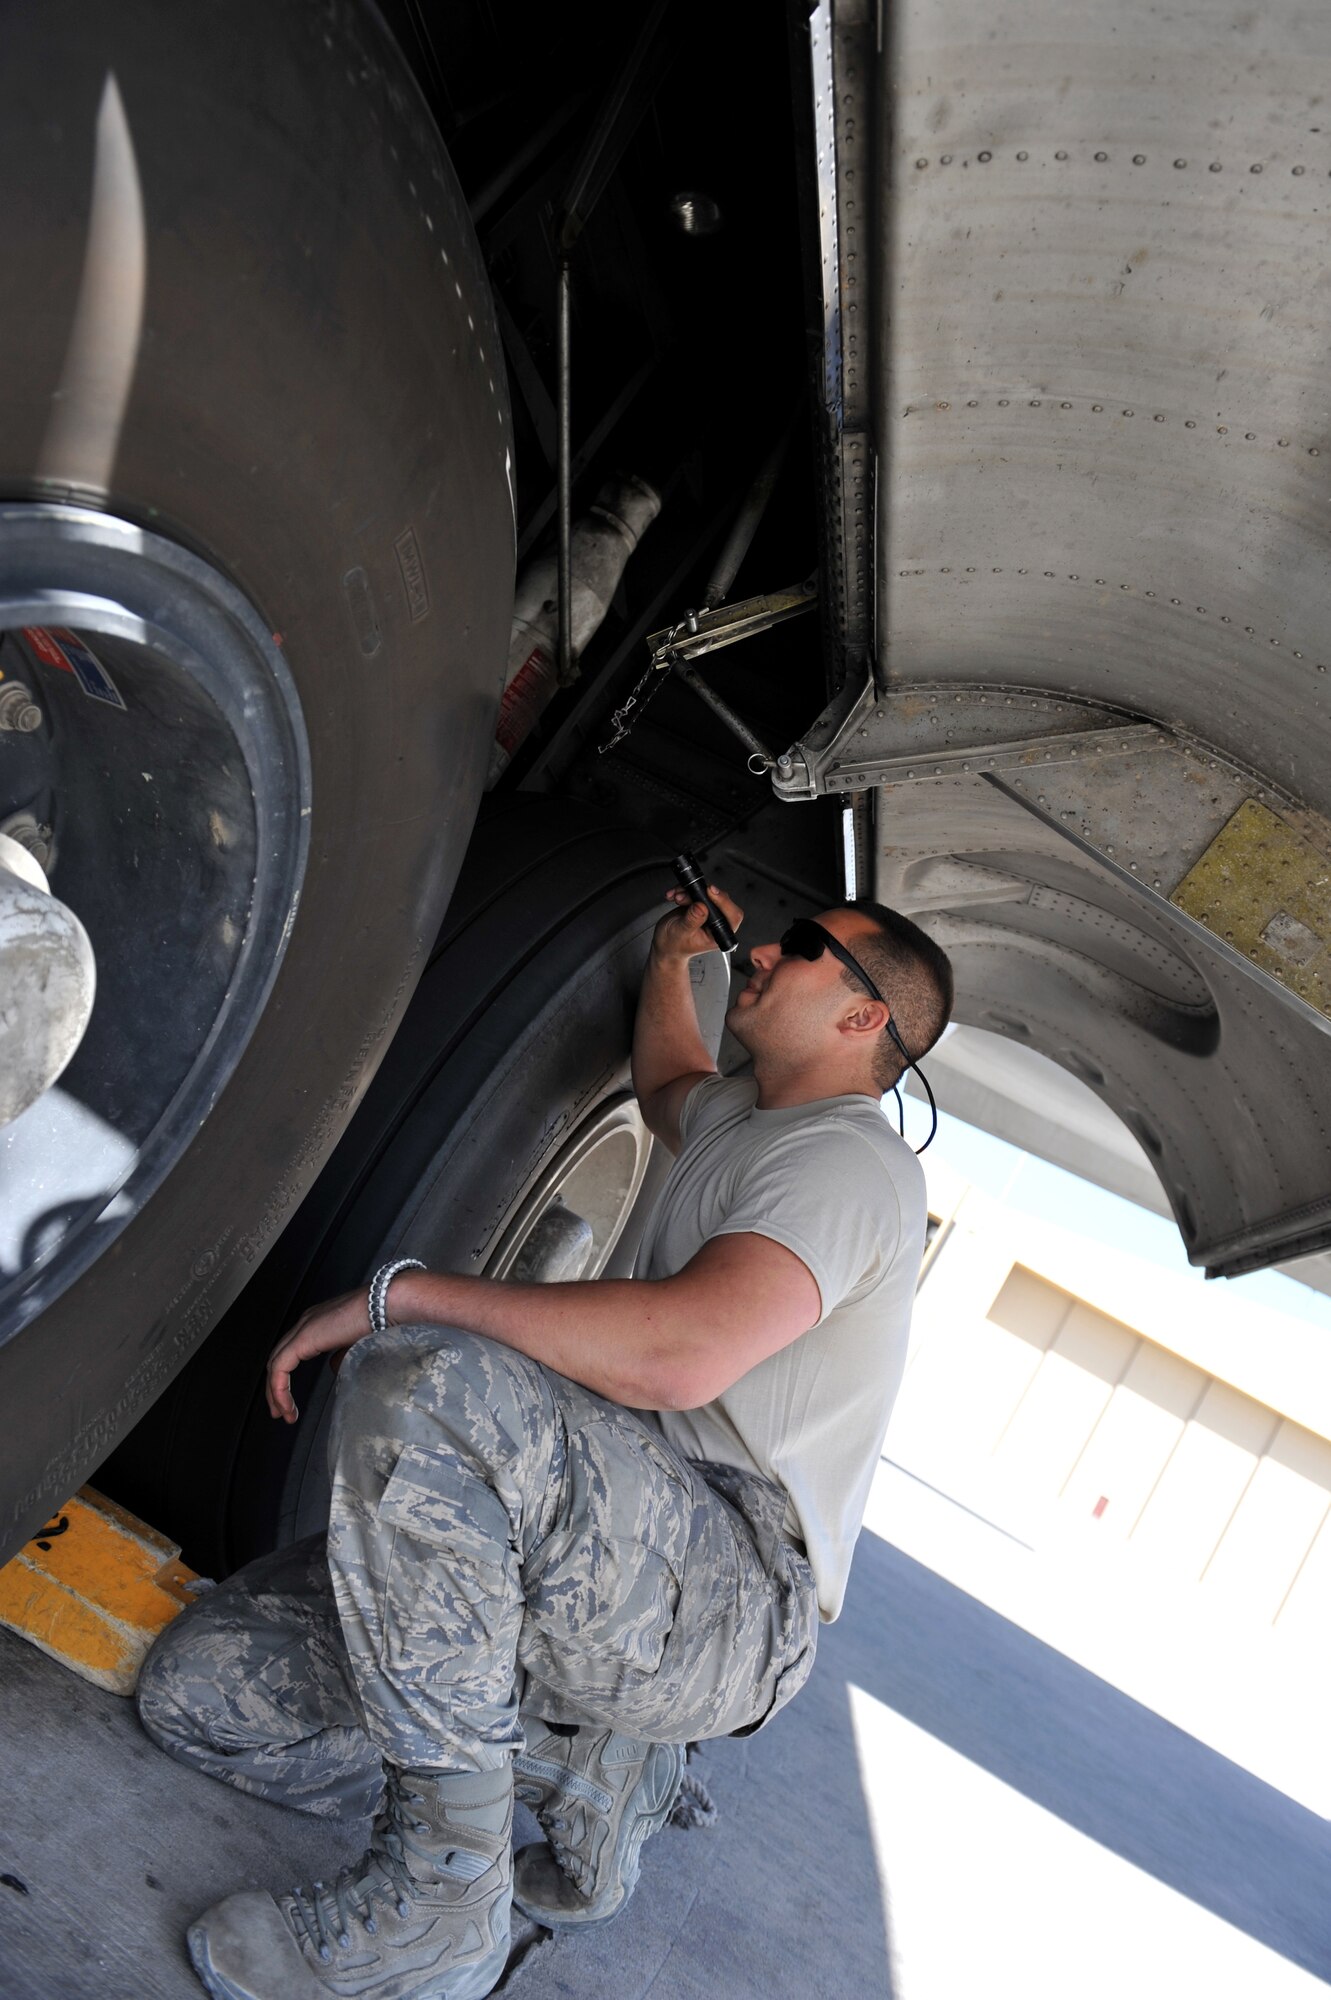 Senior Airman Donald Pruitt, 455th Expeditionary Aircraft Maintenance Squadron crewchief, does a routine tire and brake inspection on a C-130 Hercules at Bagram Airfield, Afghanistan, June 2, 2011. Airman Pruitt is deployed from the 136th Maintenance Squadron, Texas Air National Guard, Texas and is a native of Richardson, Texas. (U.S. Air Force photo by Senior Airman Sheila deVera)